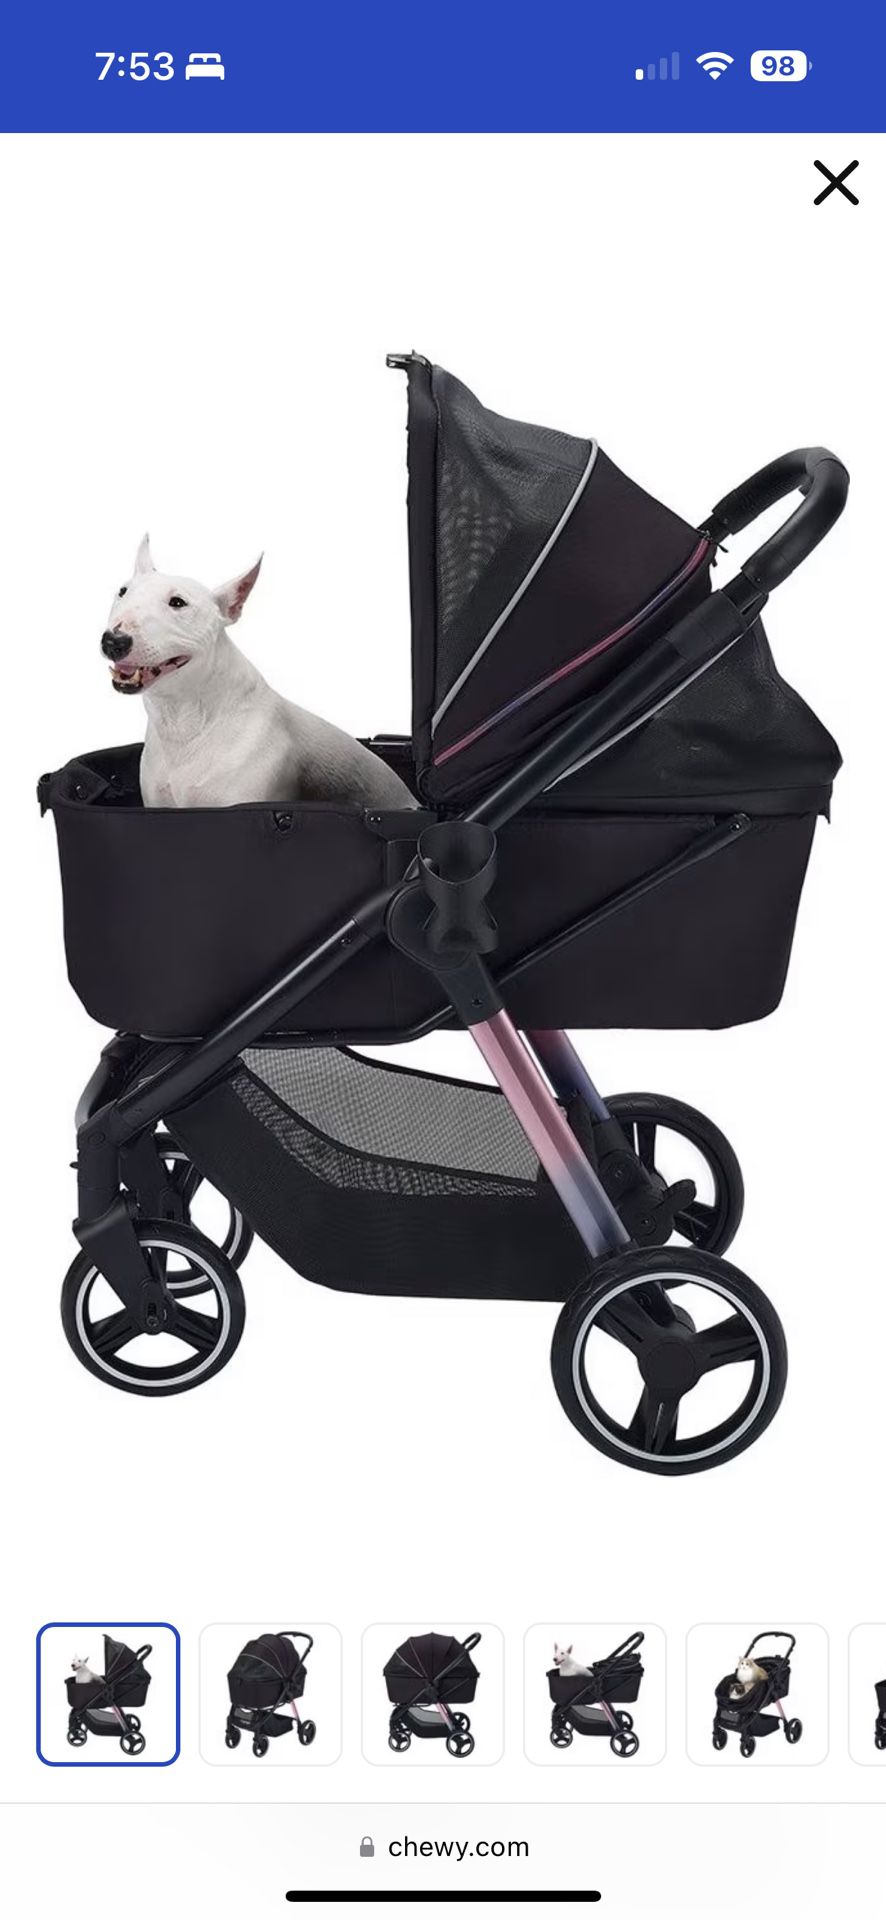 ibiyaya - Retro Luxe - Dog Stroller for Medium Dogs, Large and Small Dogs - One-Step Folding, Heavy Duty Zipperless Design with Adjustable Handle - So